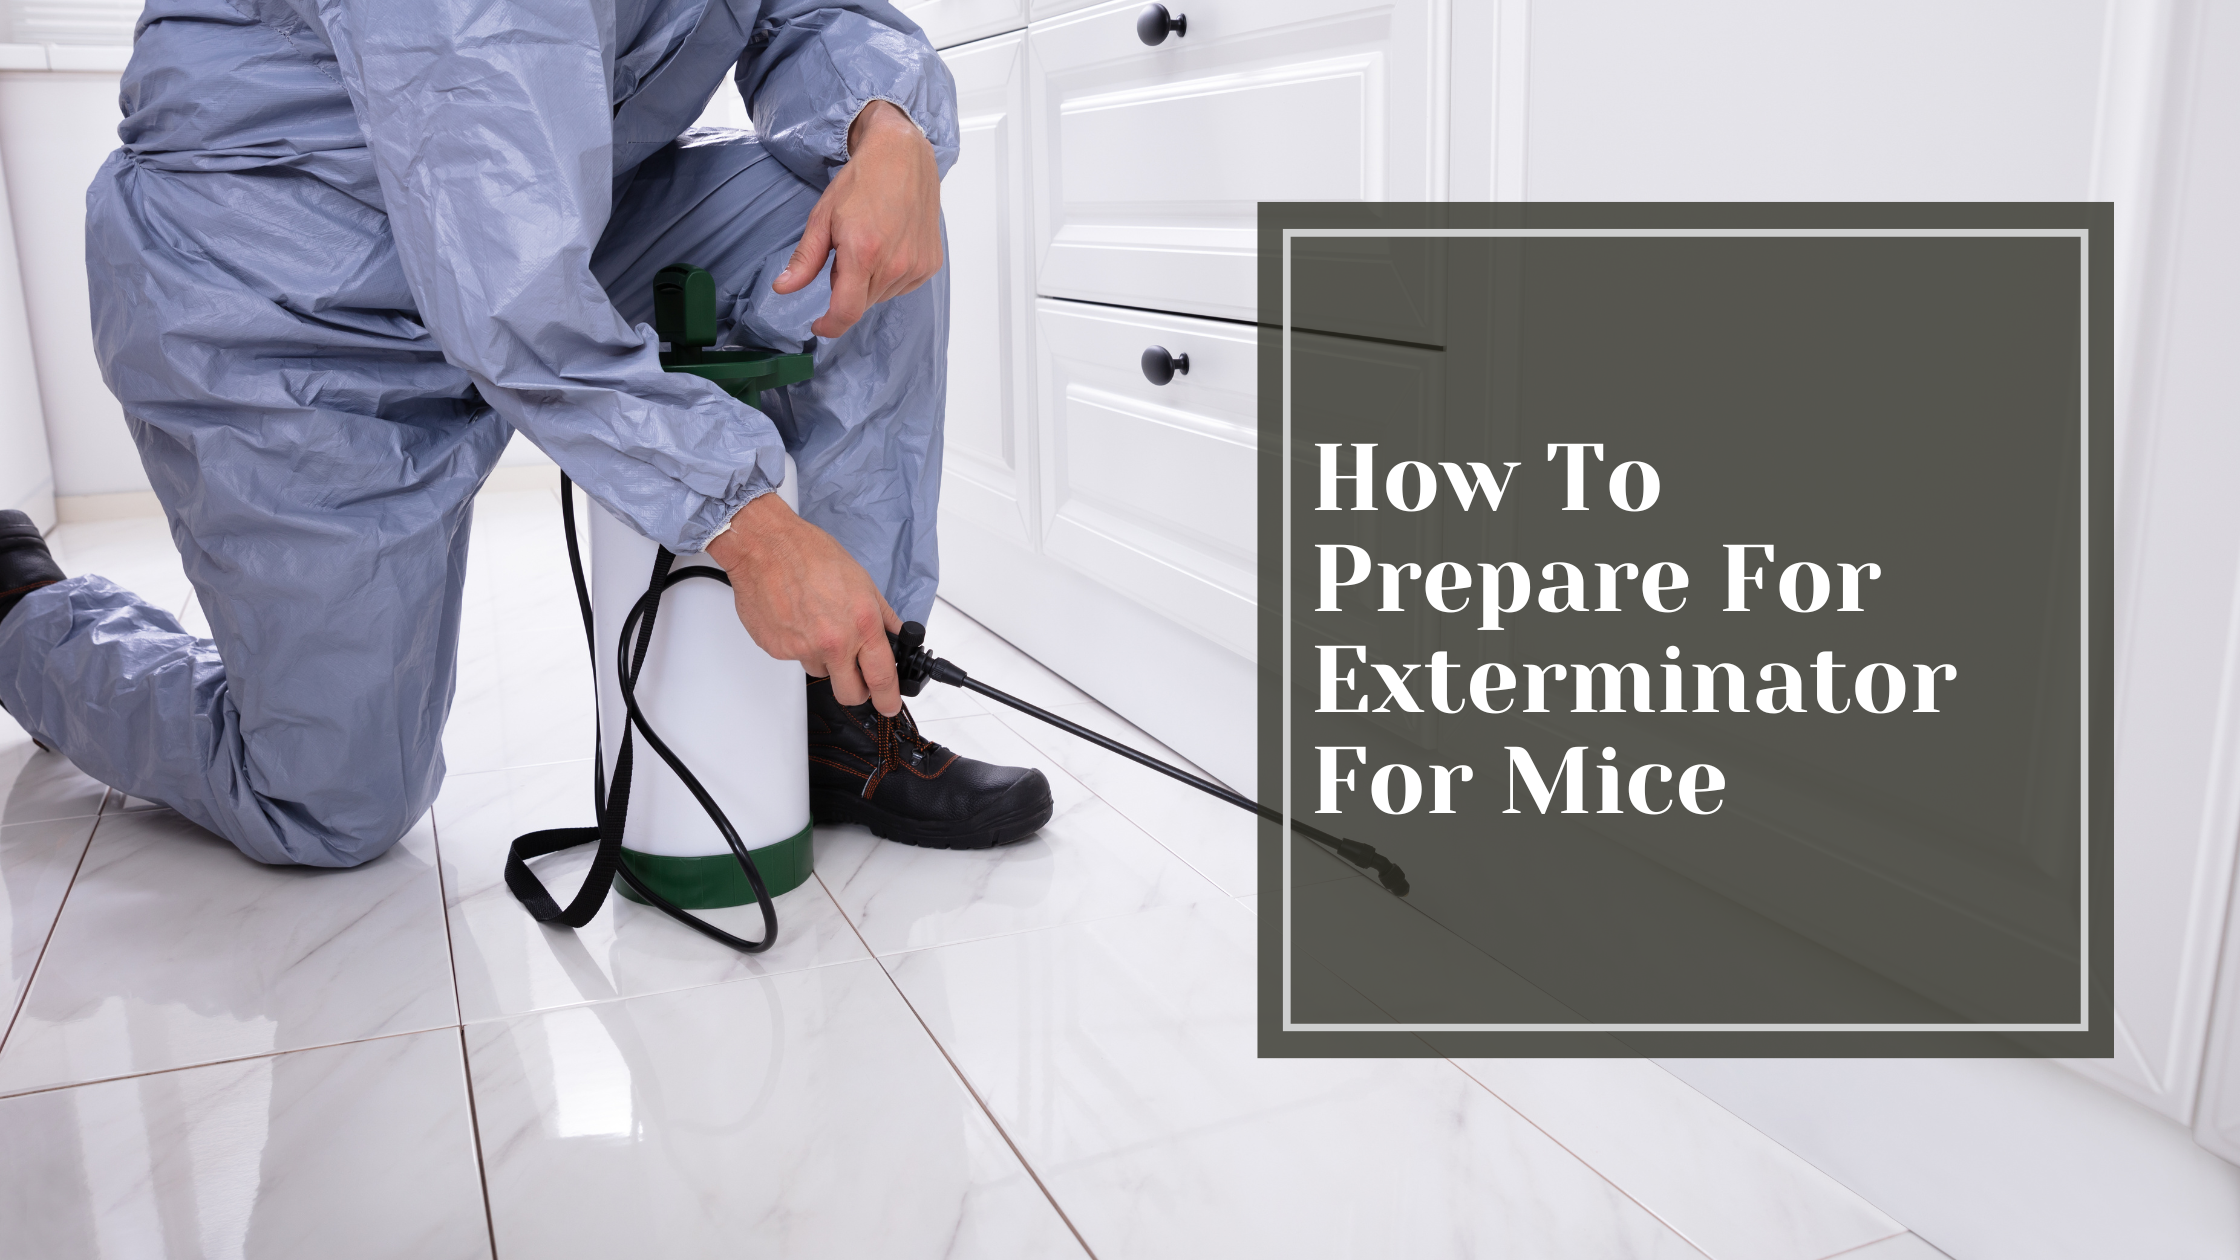 How To Prepare For Exterminator For Mice